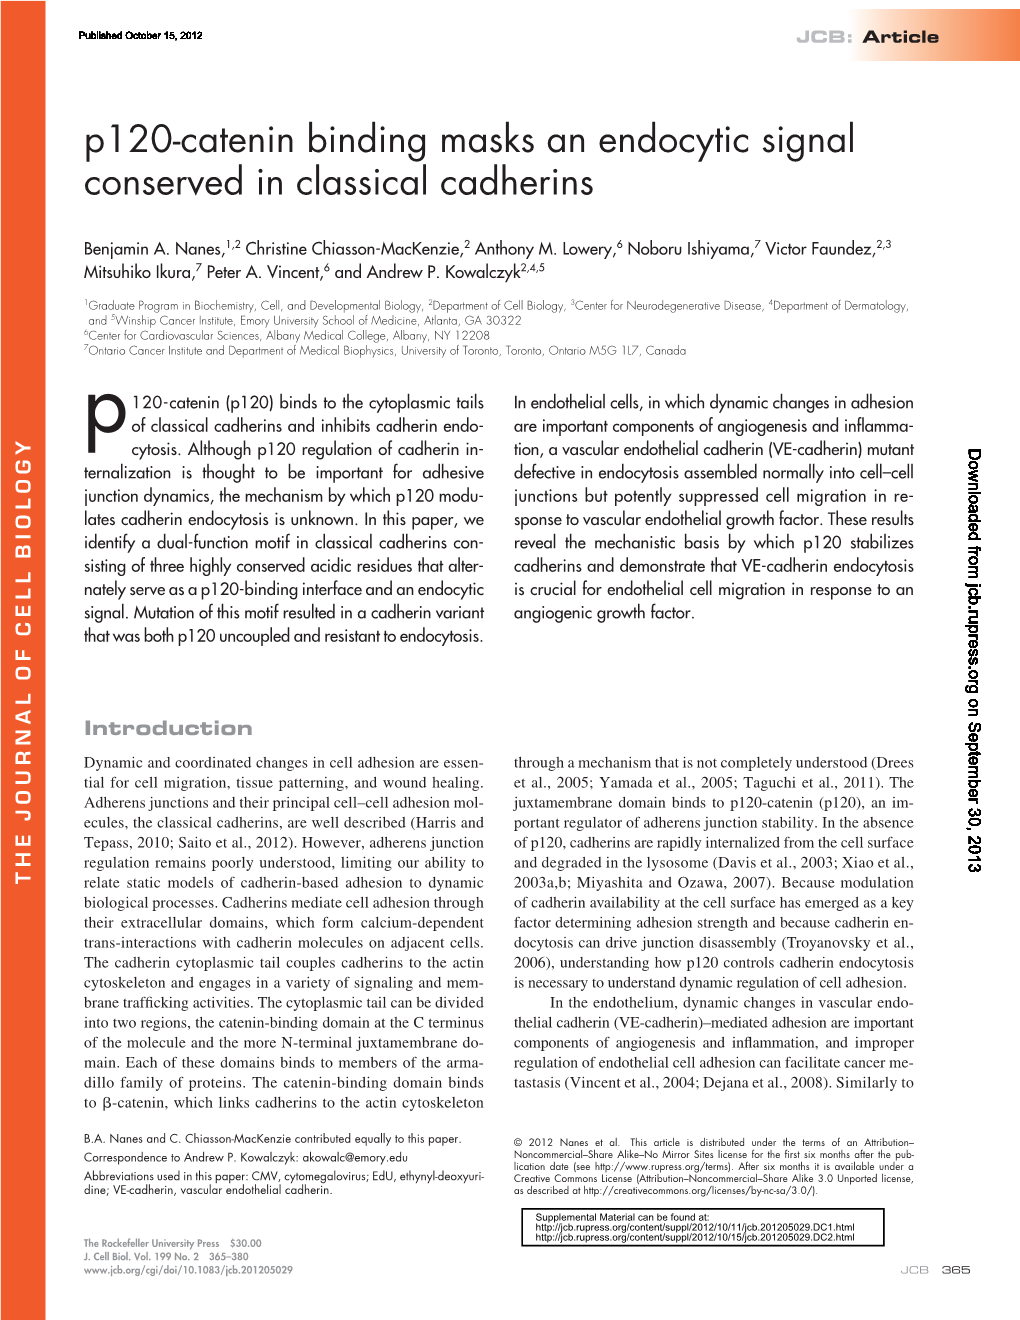 P120-Catenin Binding Masks an Endocytic Signal Conserved in Classical Cadherins